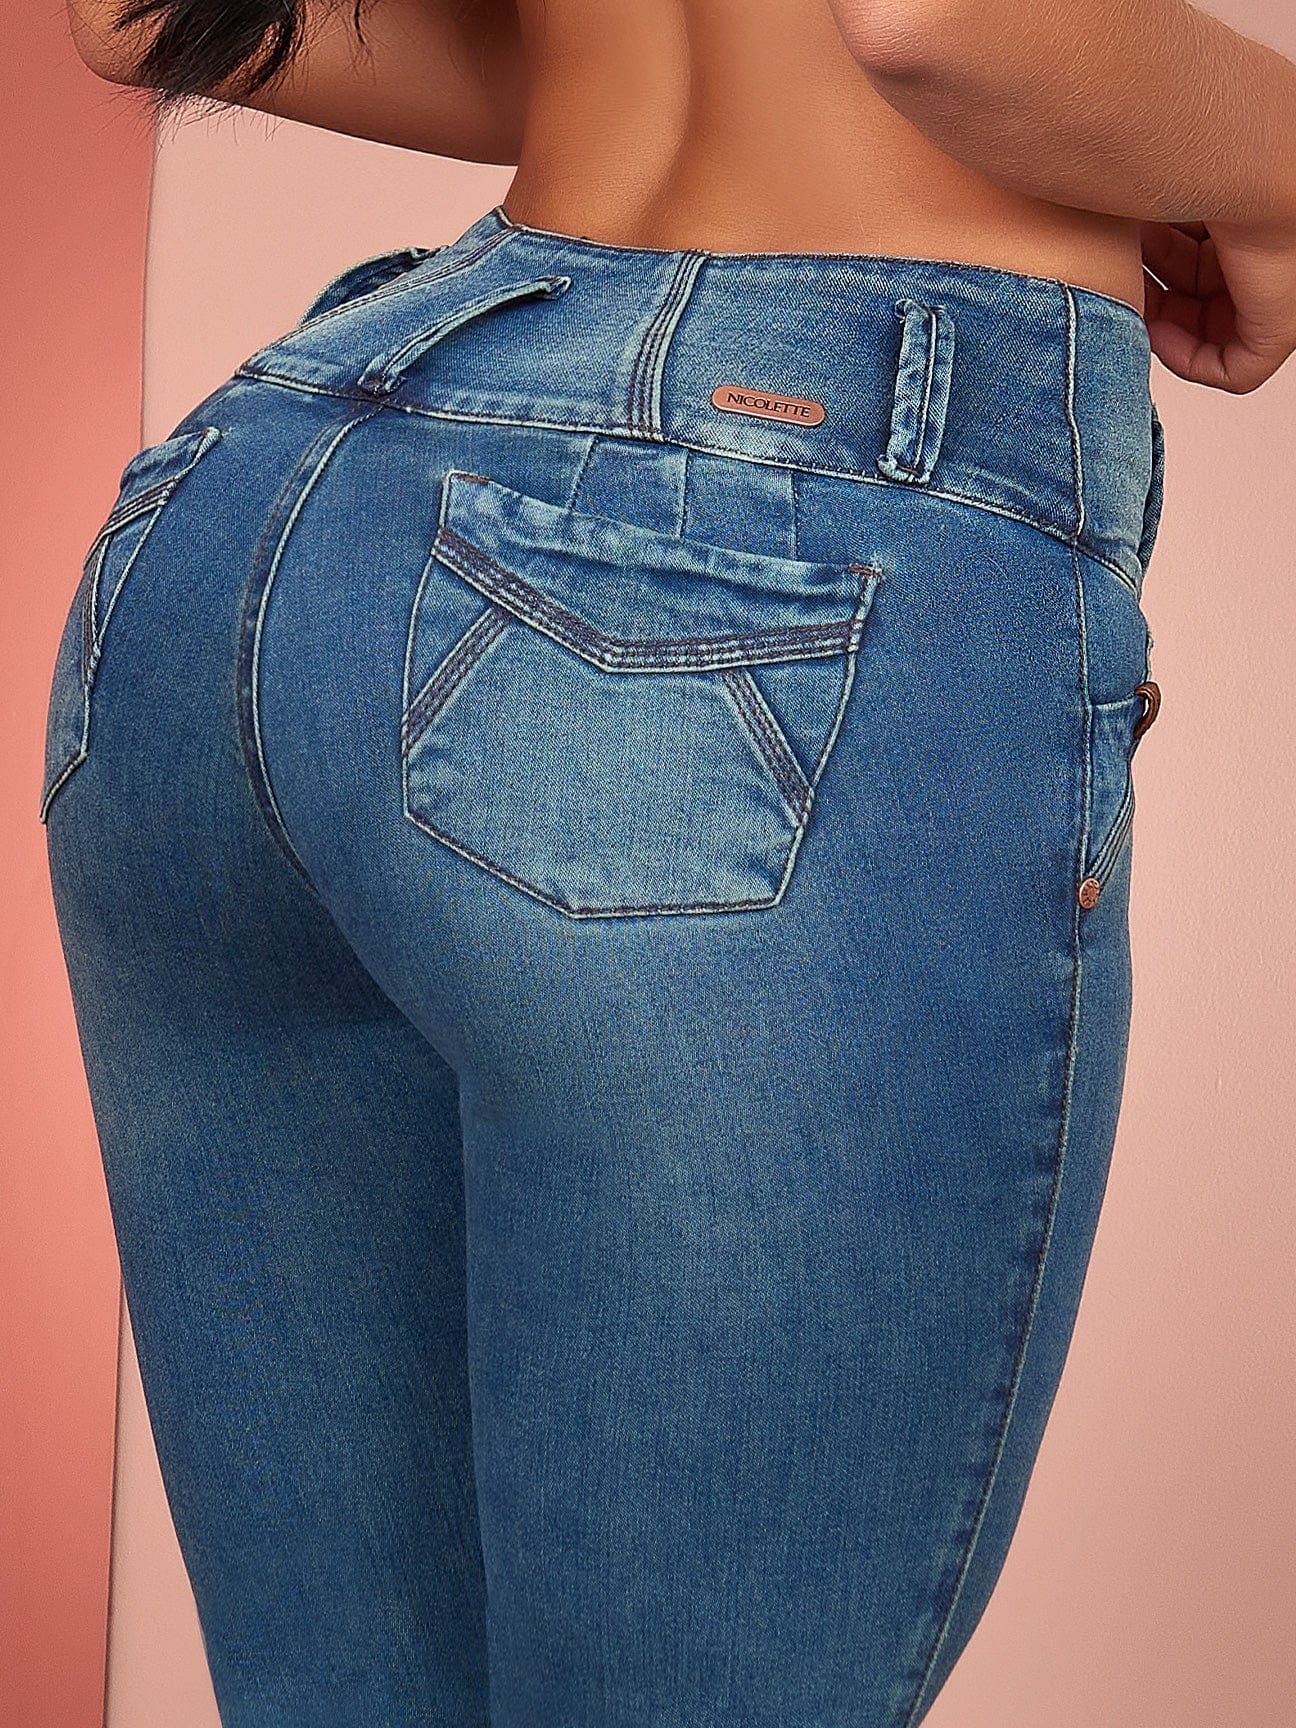 JEAN LEVANTACOLA / Buttlifting Jeans 009